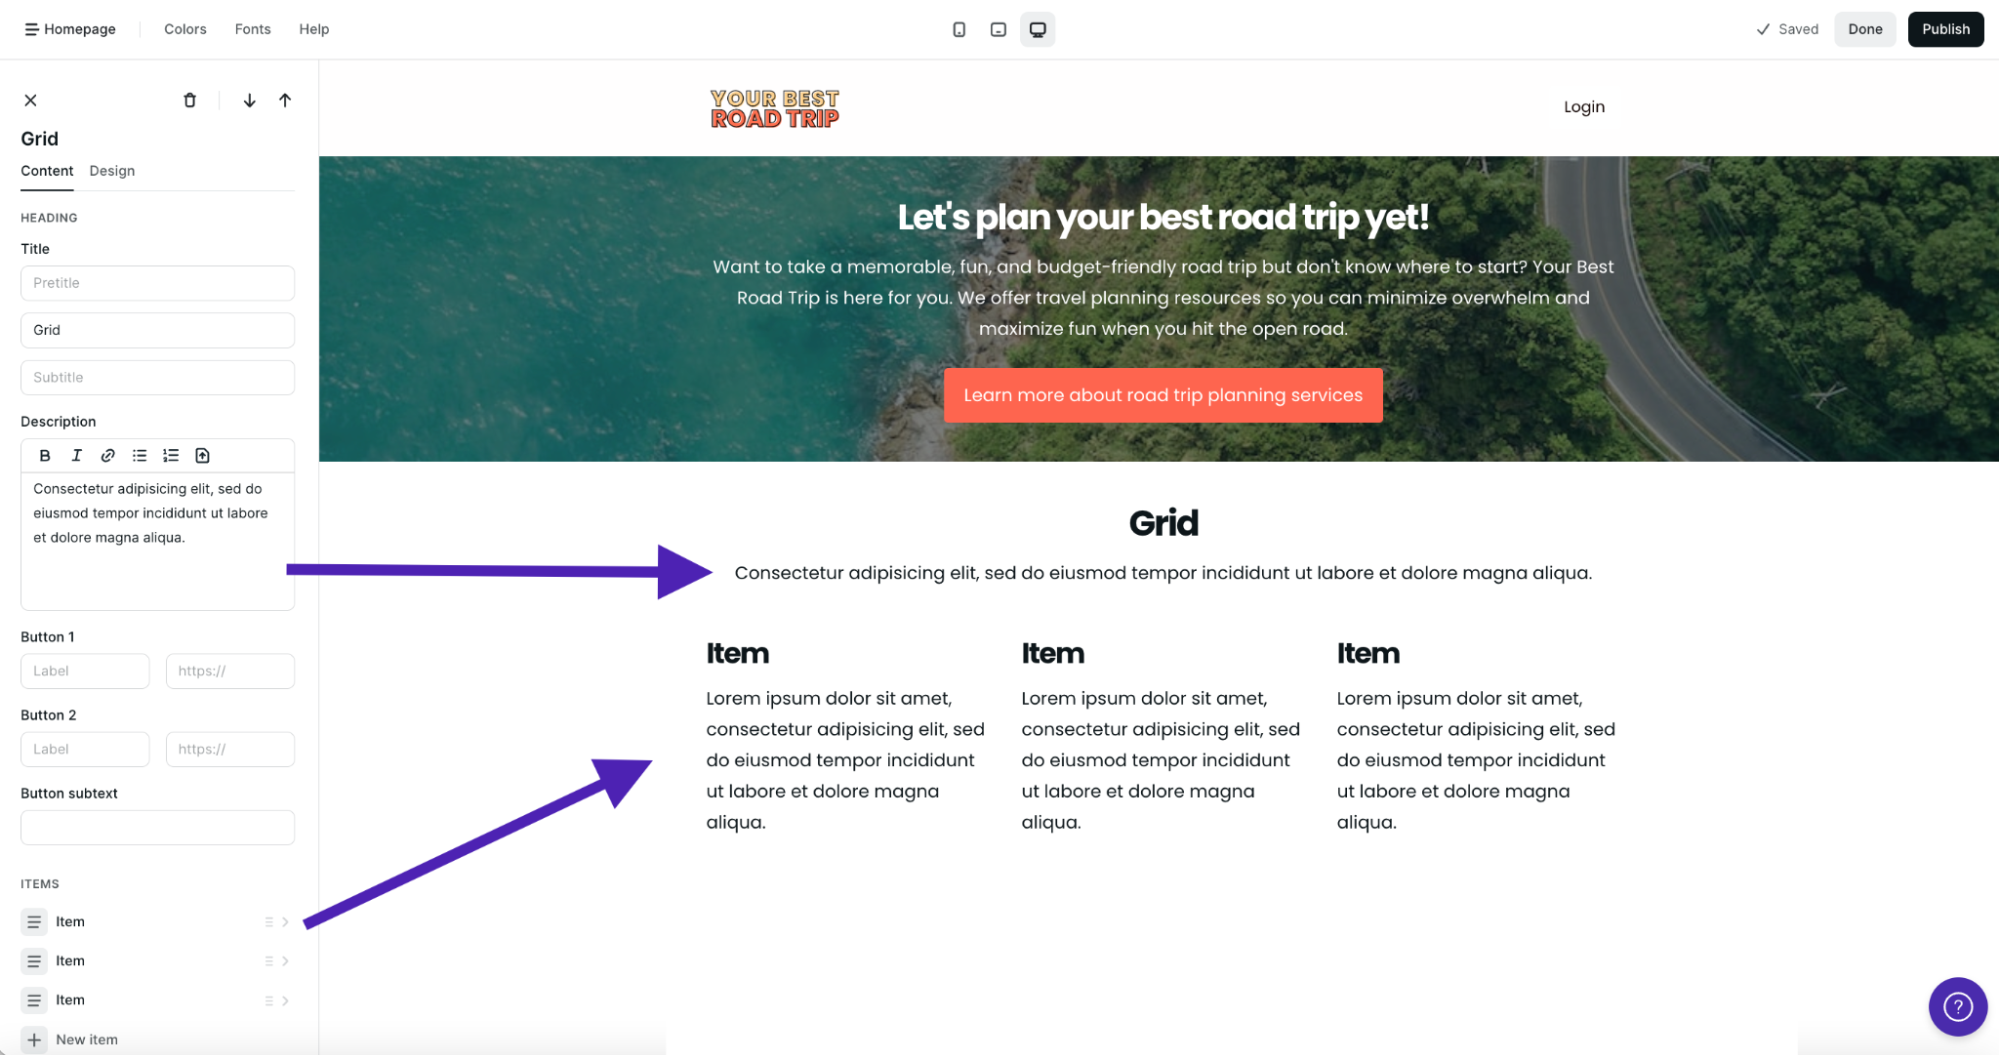 Website guide: homepage, build together featured products 2